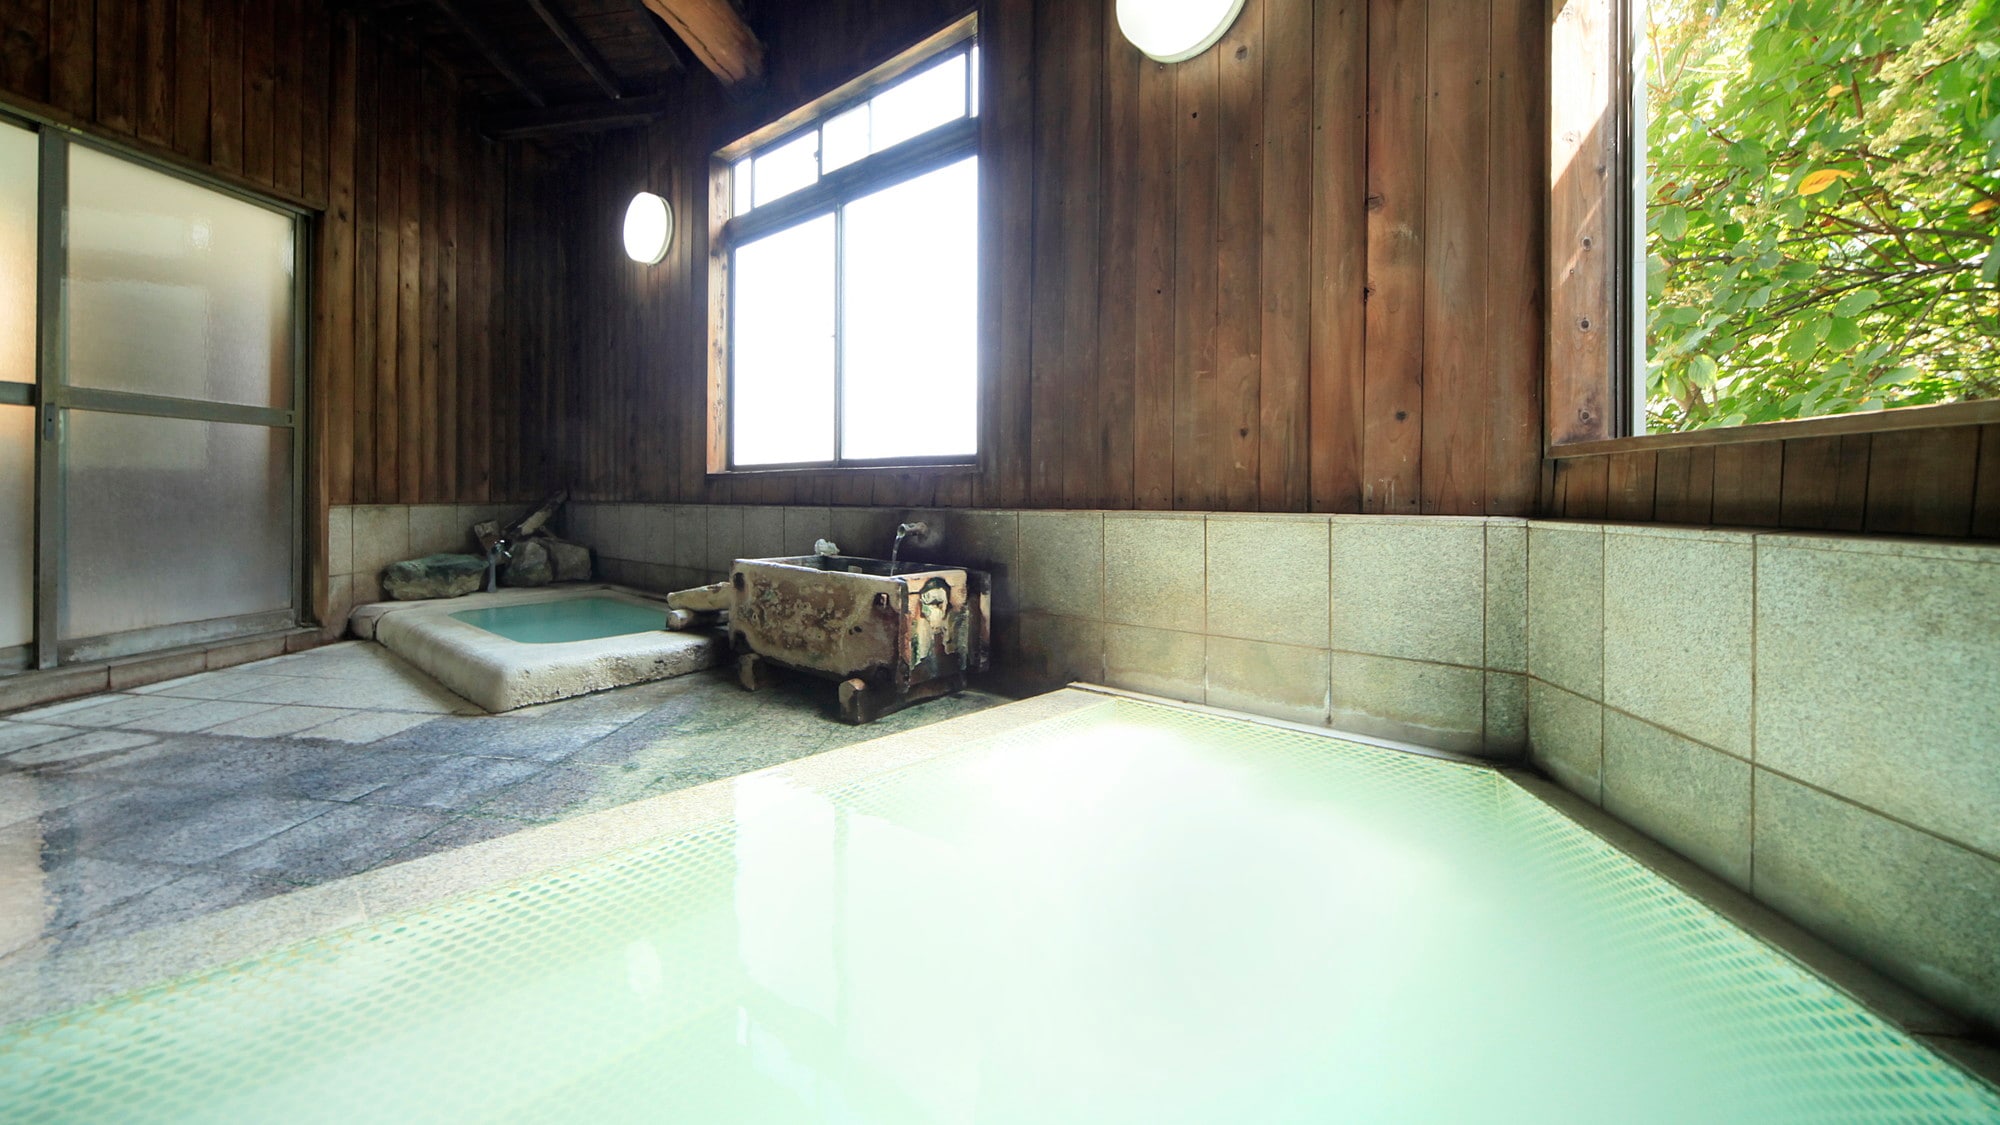 Yunohana bath (men's bath) at the source. The floor is made of granite and the pillars are made of cedar.